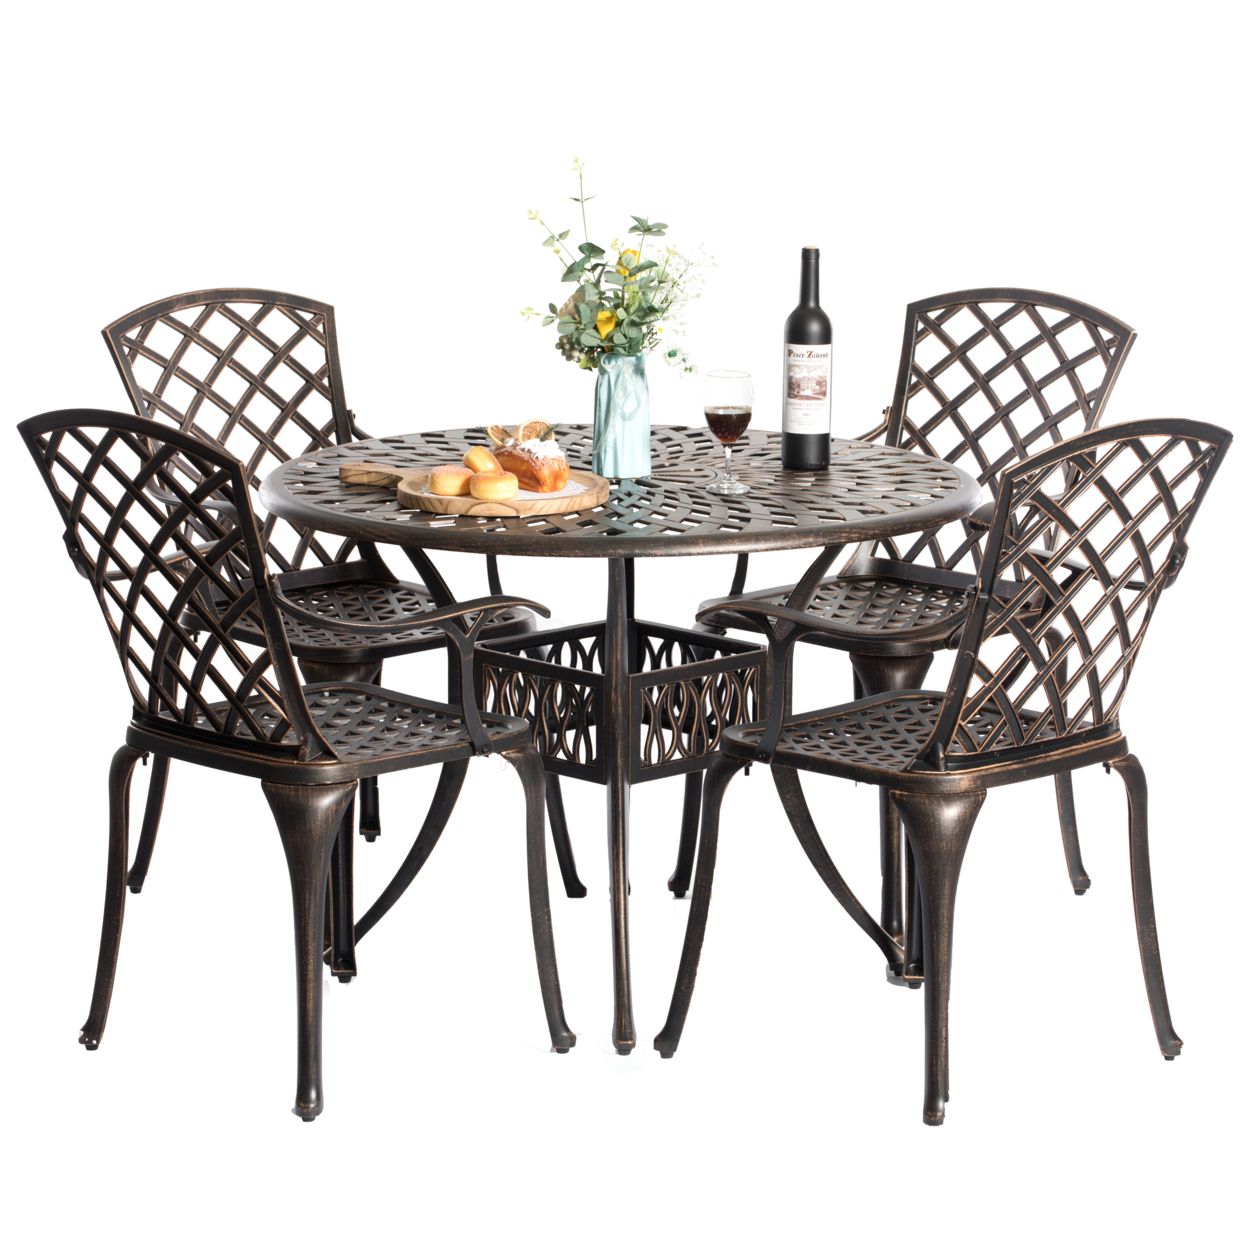 Outdoor And Indoor Bronze Dinning Set 4 Chairs With 1 Table Bistro Patio Cast Aluminum.